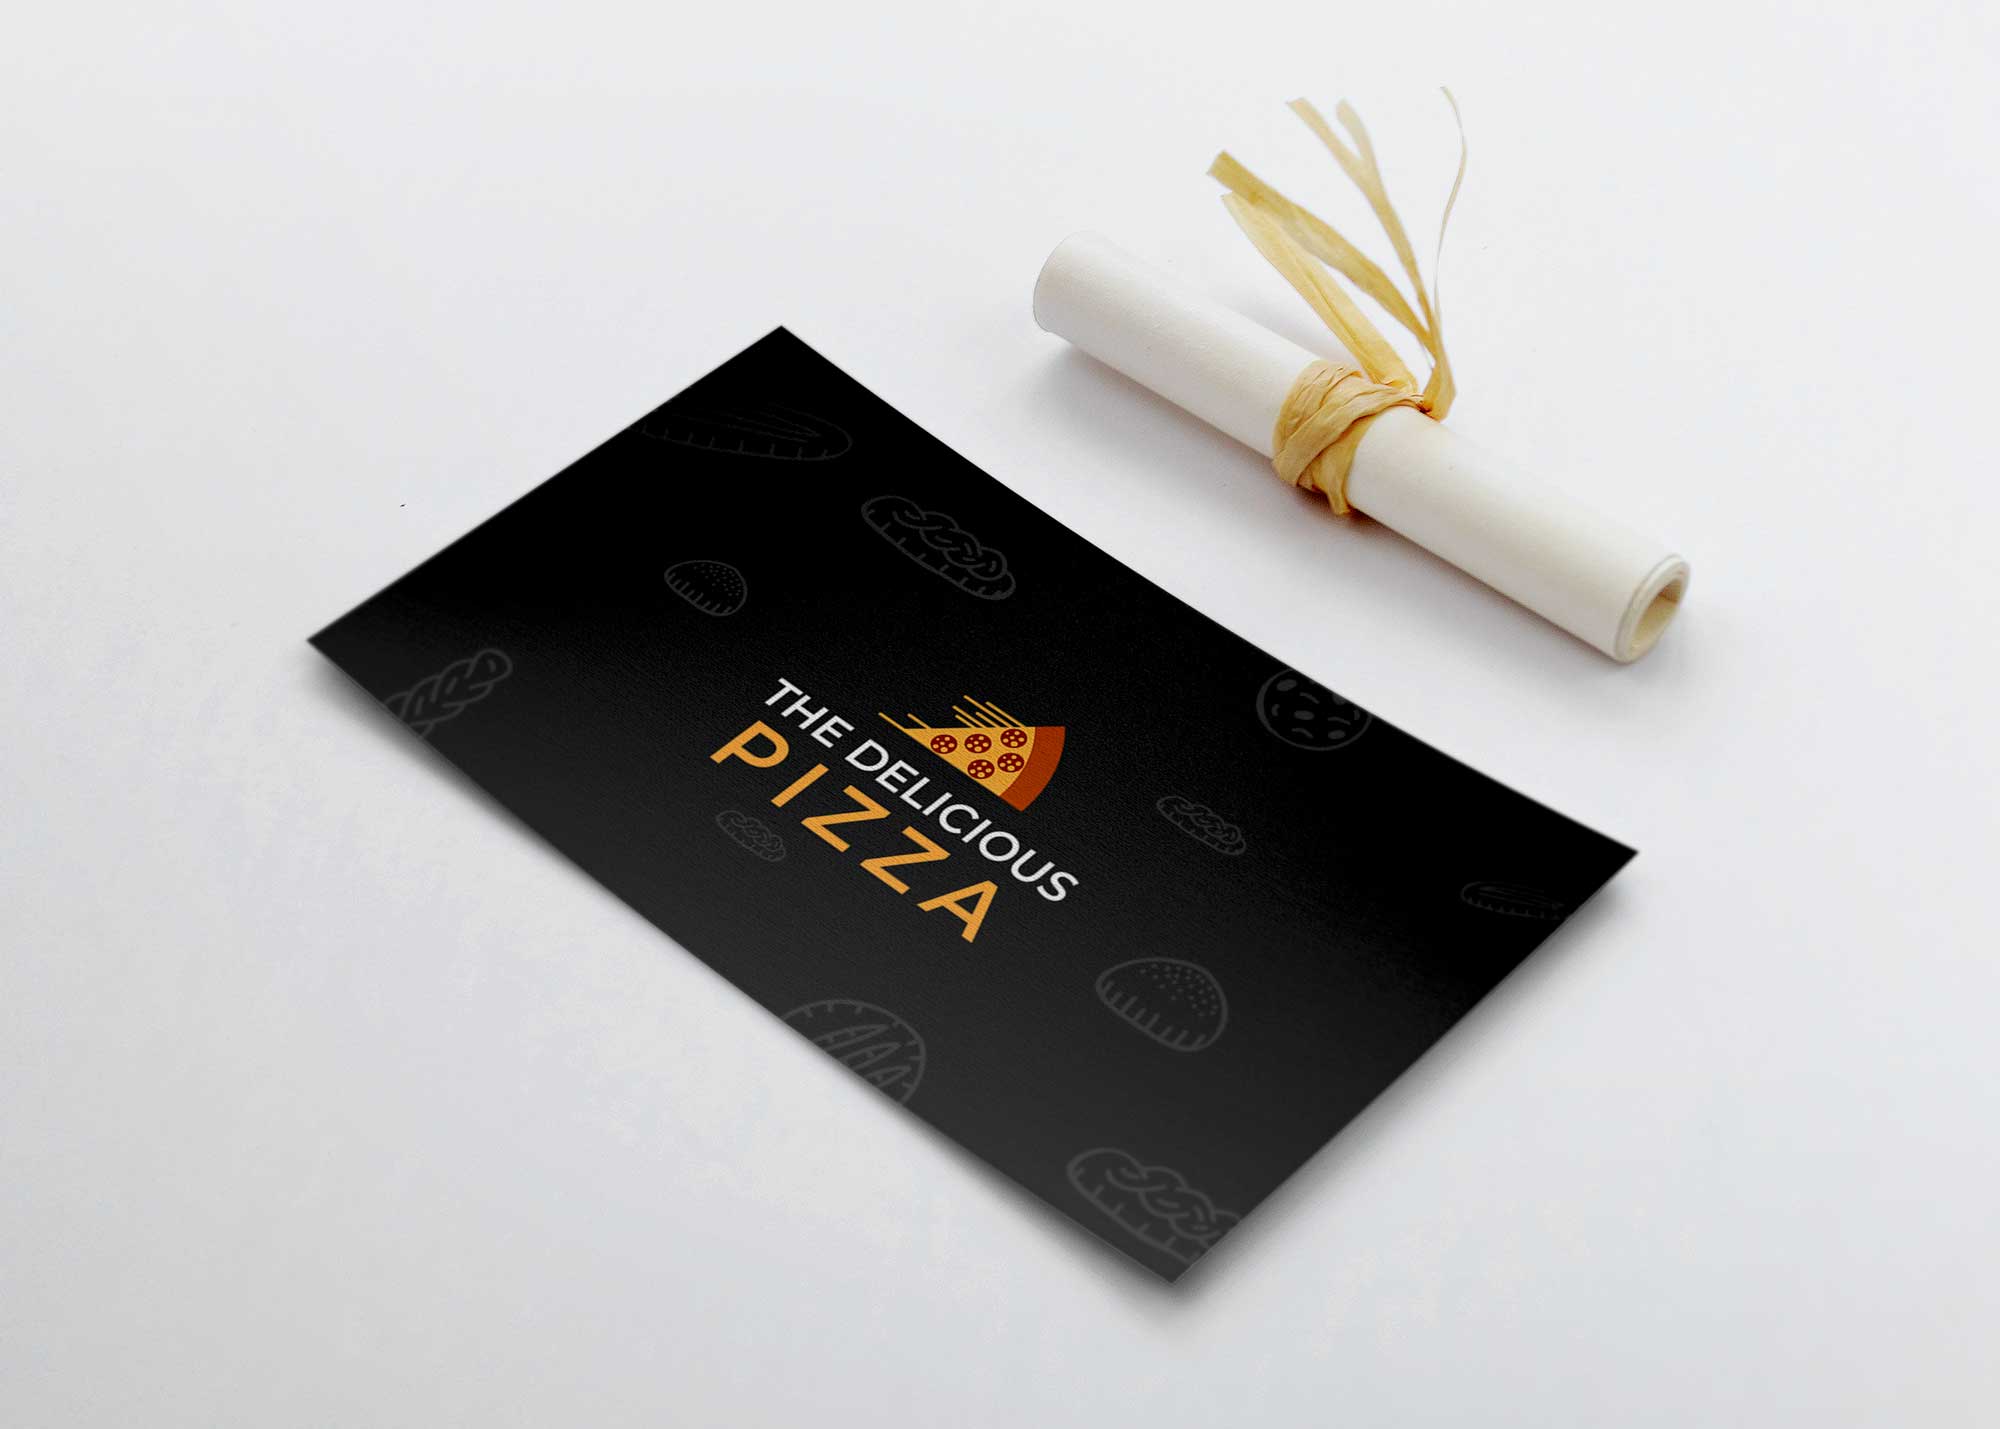 Pizza Business Card Mockup